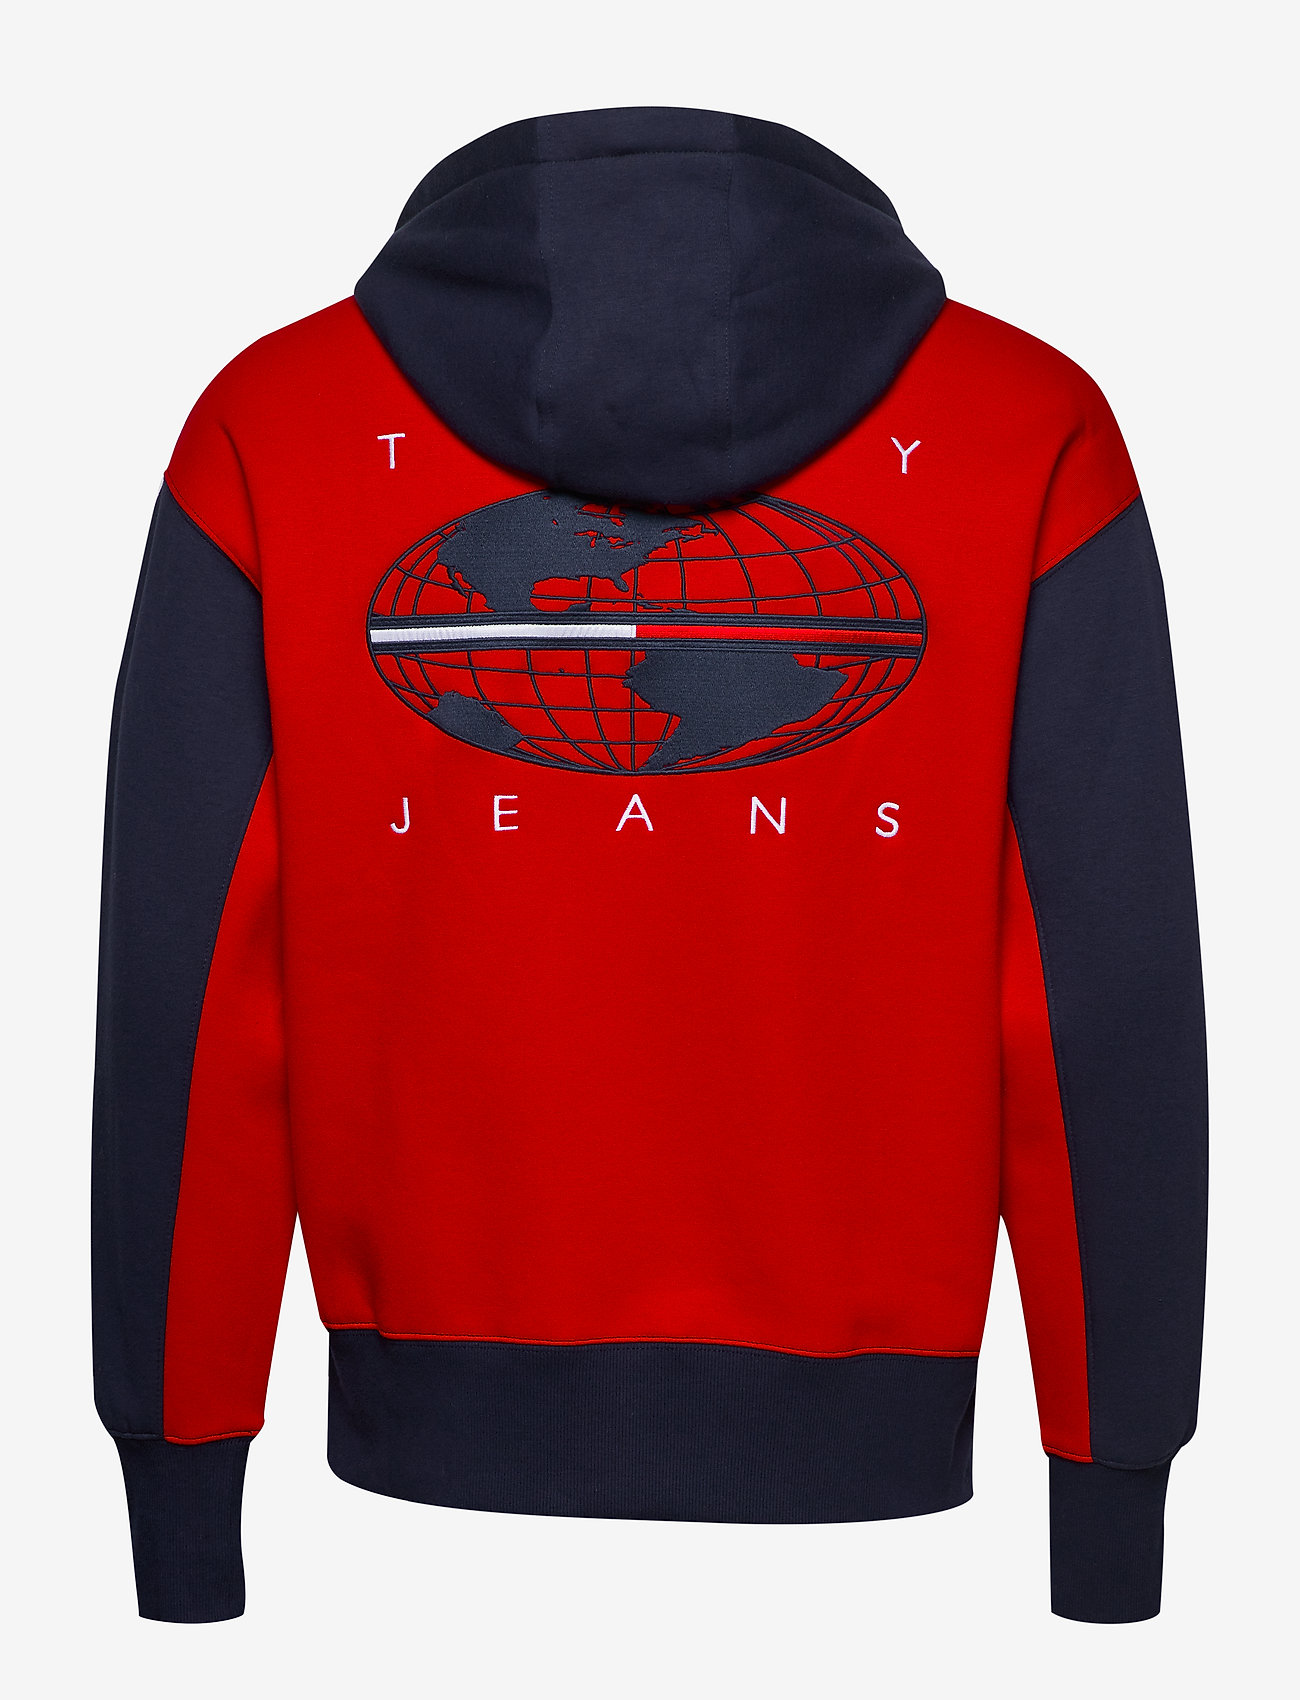 tommy jeans tjm graphic hoodie